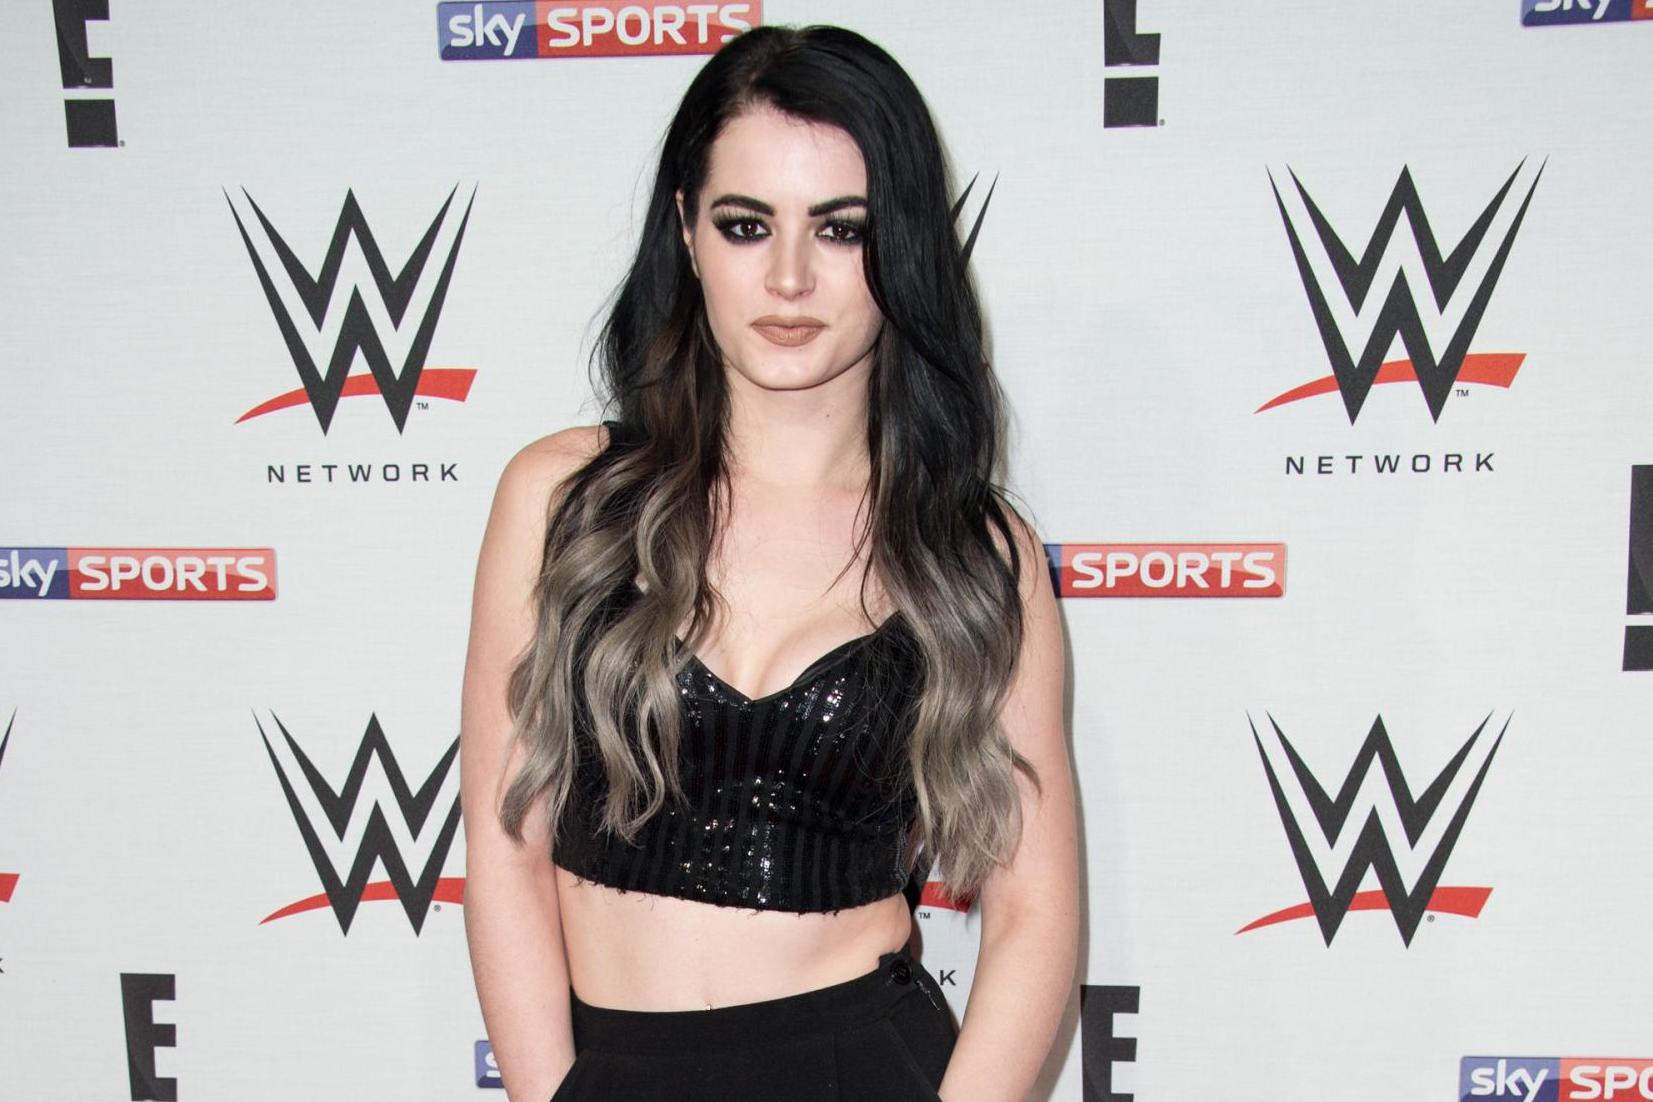 1653px x 1102px - Who is Paige? Everything you need to know about the WWE star | The ...